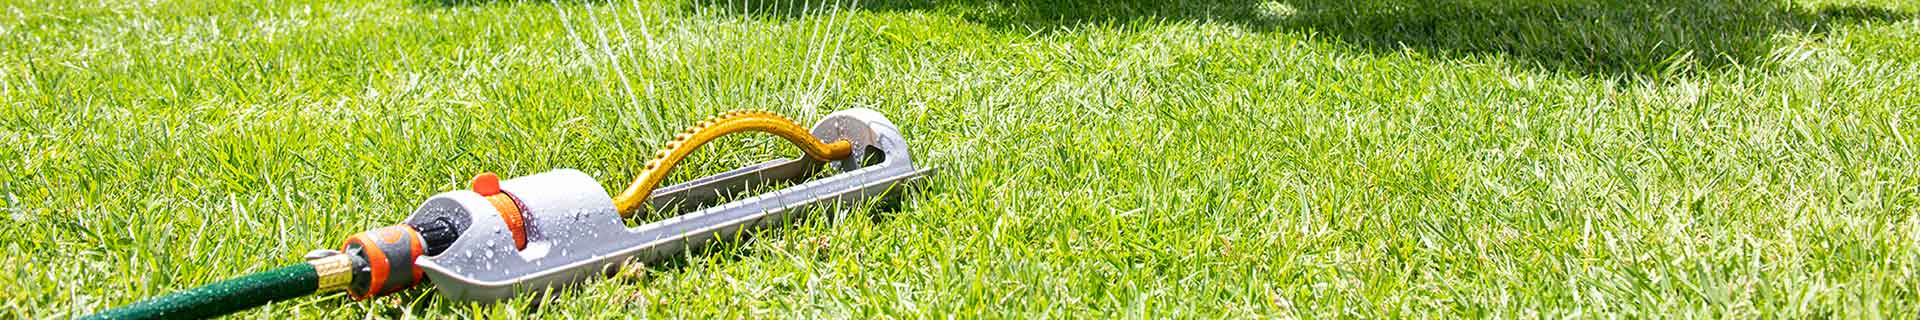 <p>Our 5 favourite sprinklers for summer</p>
